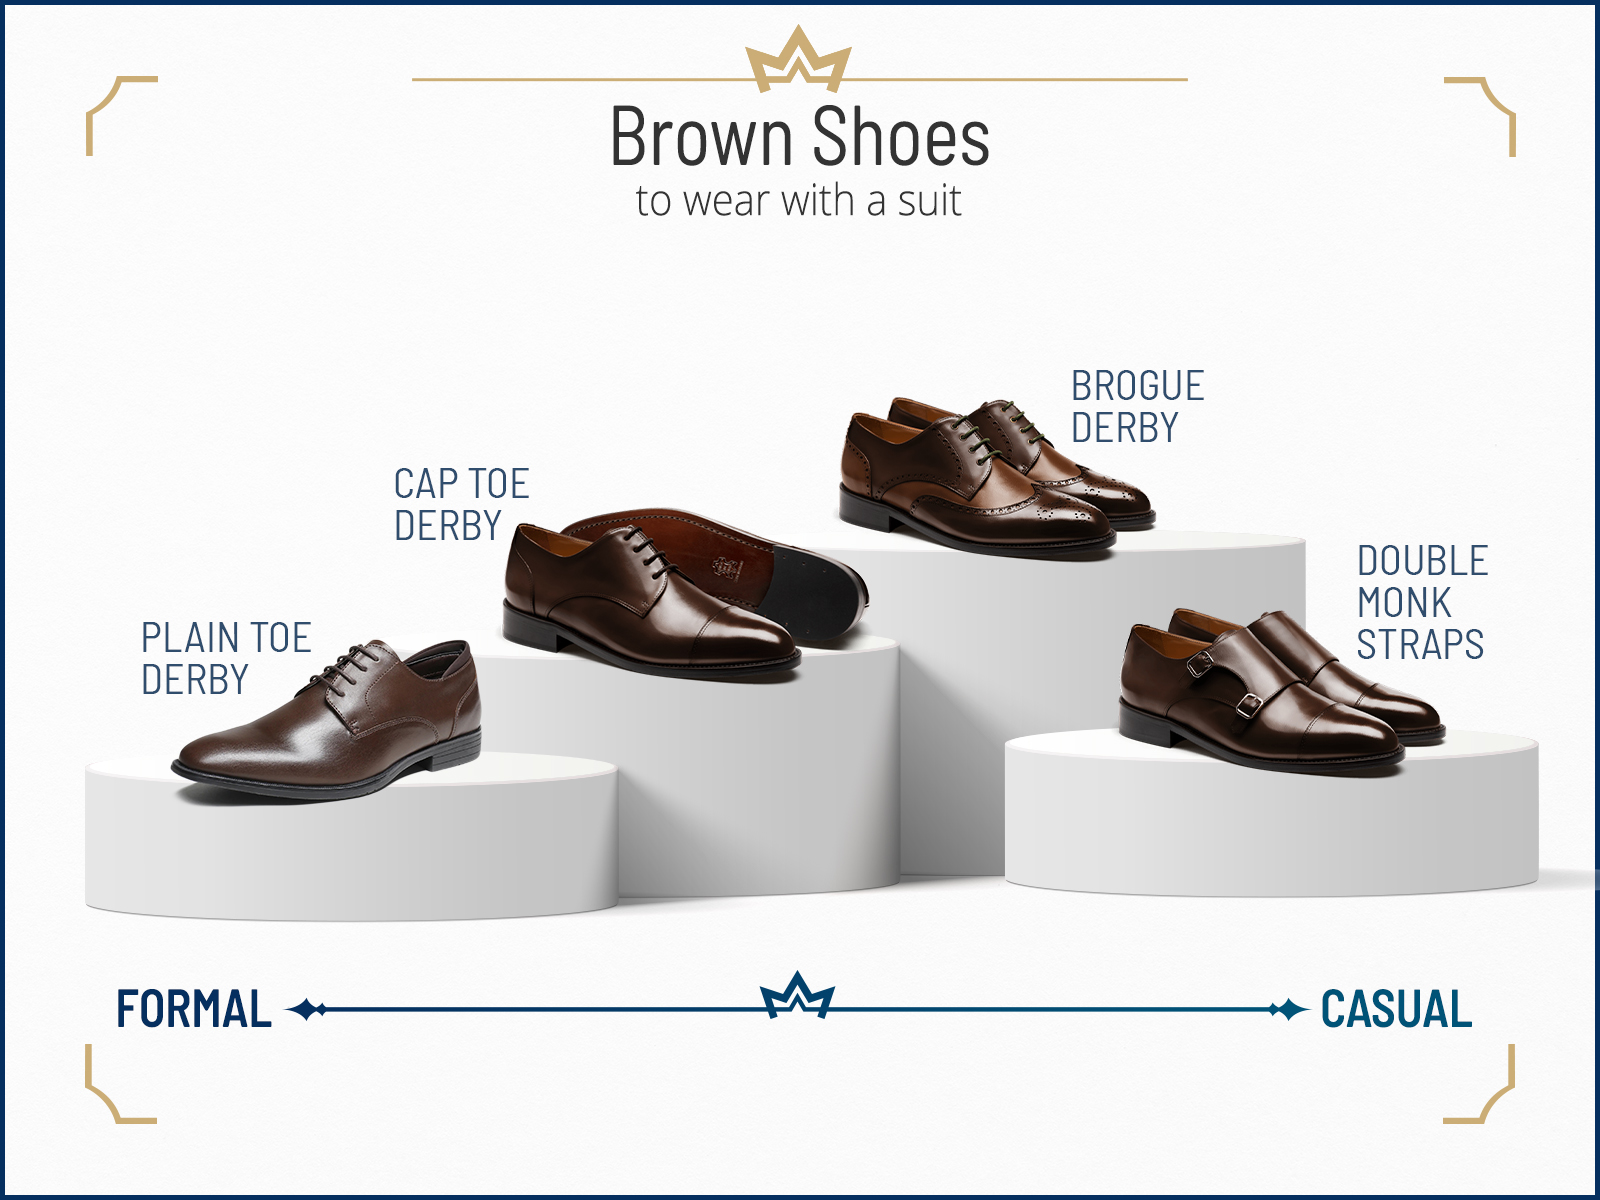 Brown dress shoe types to wear with a suit